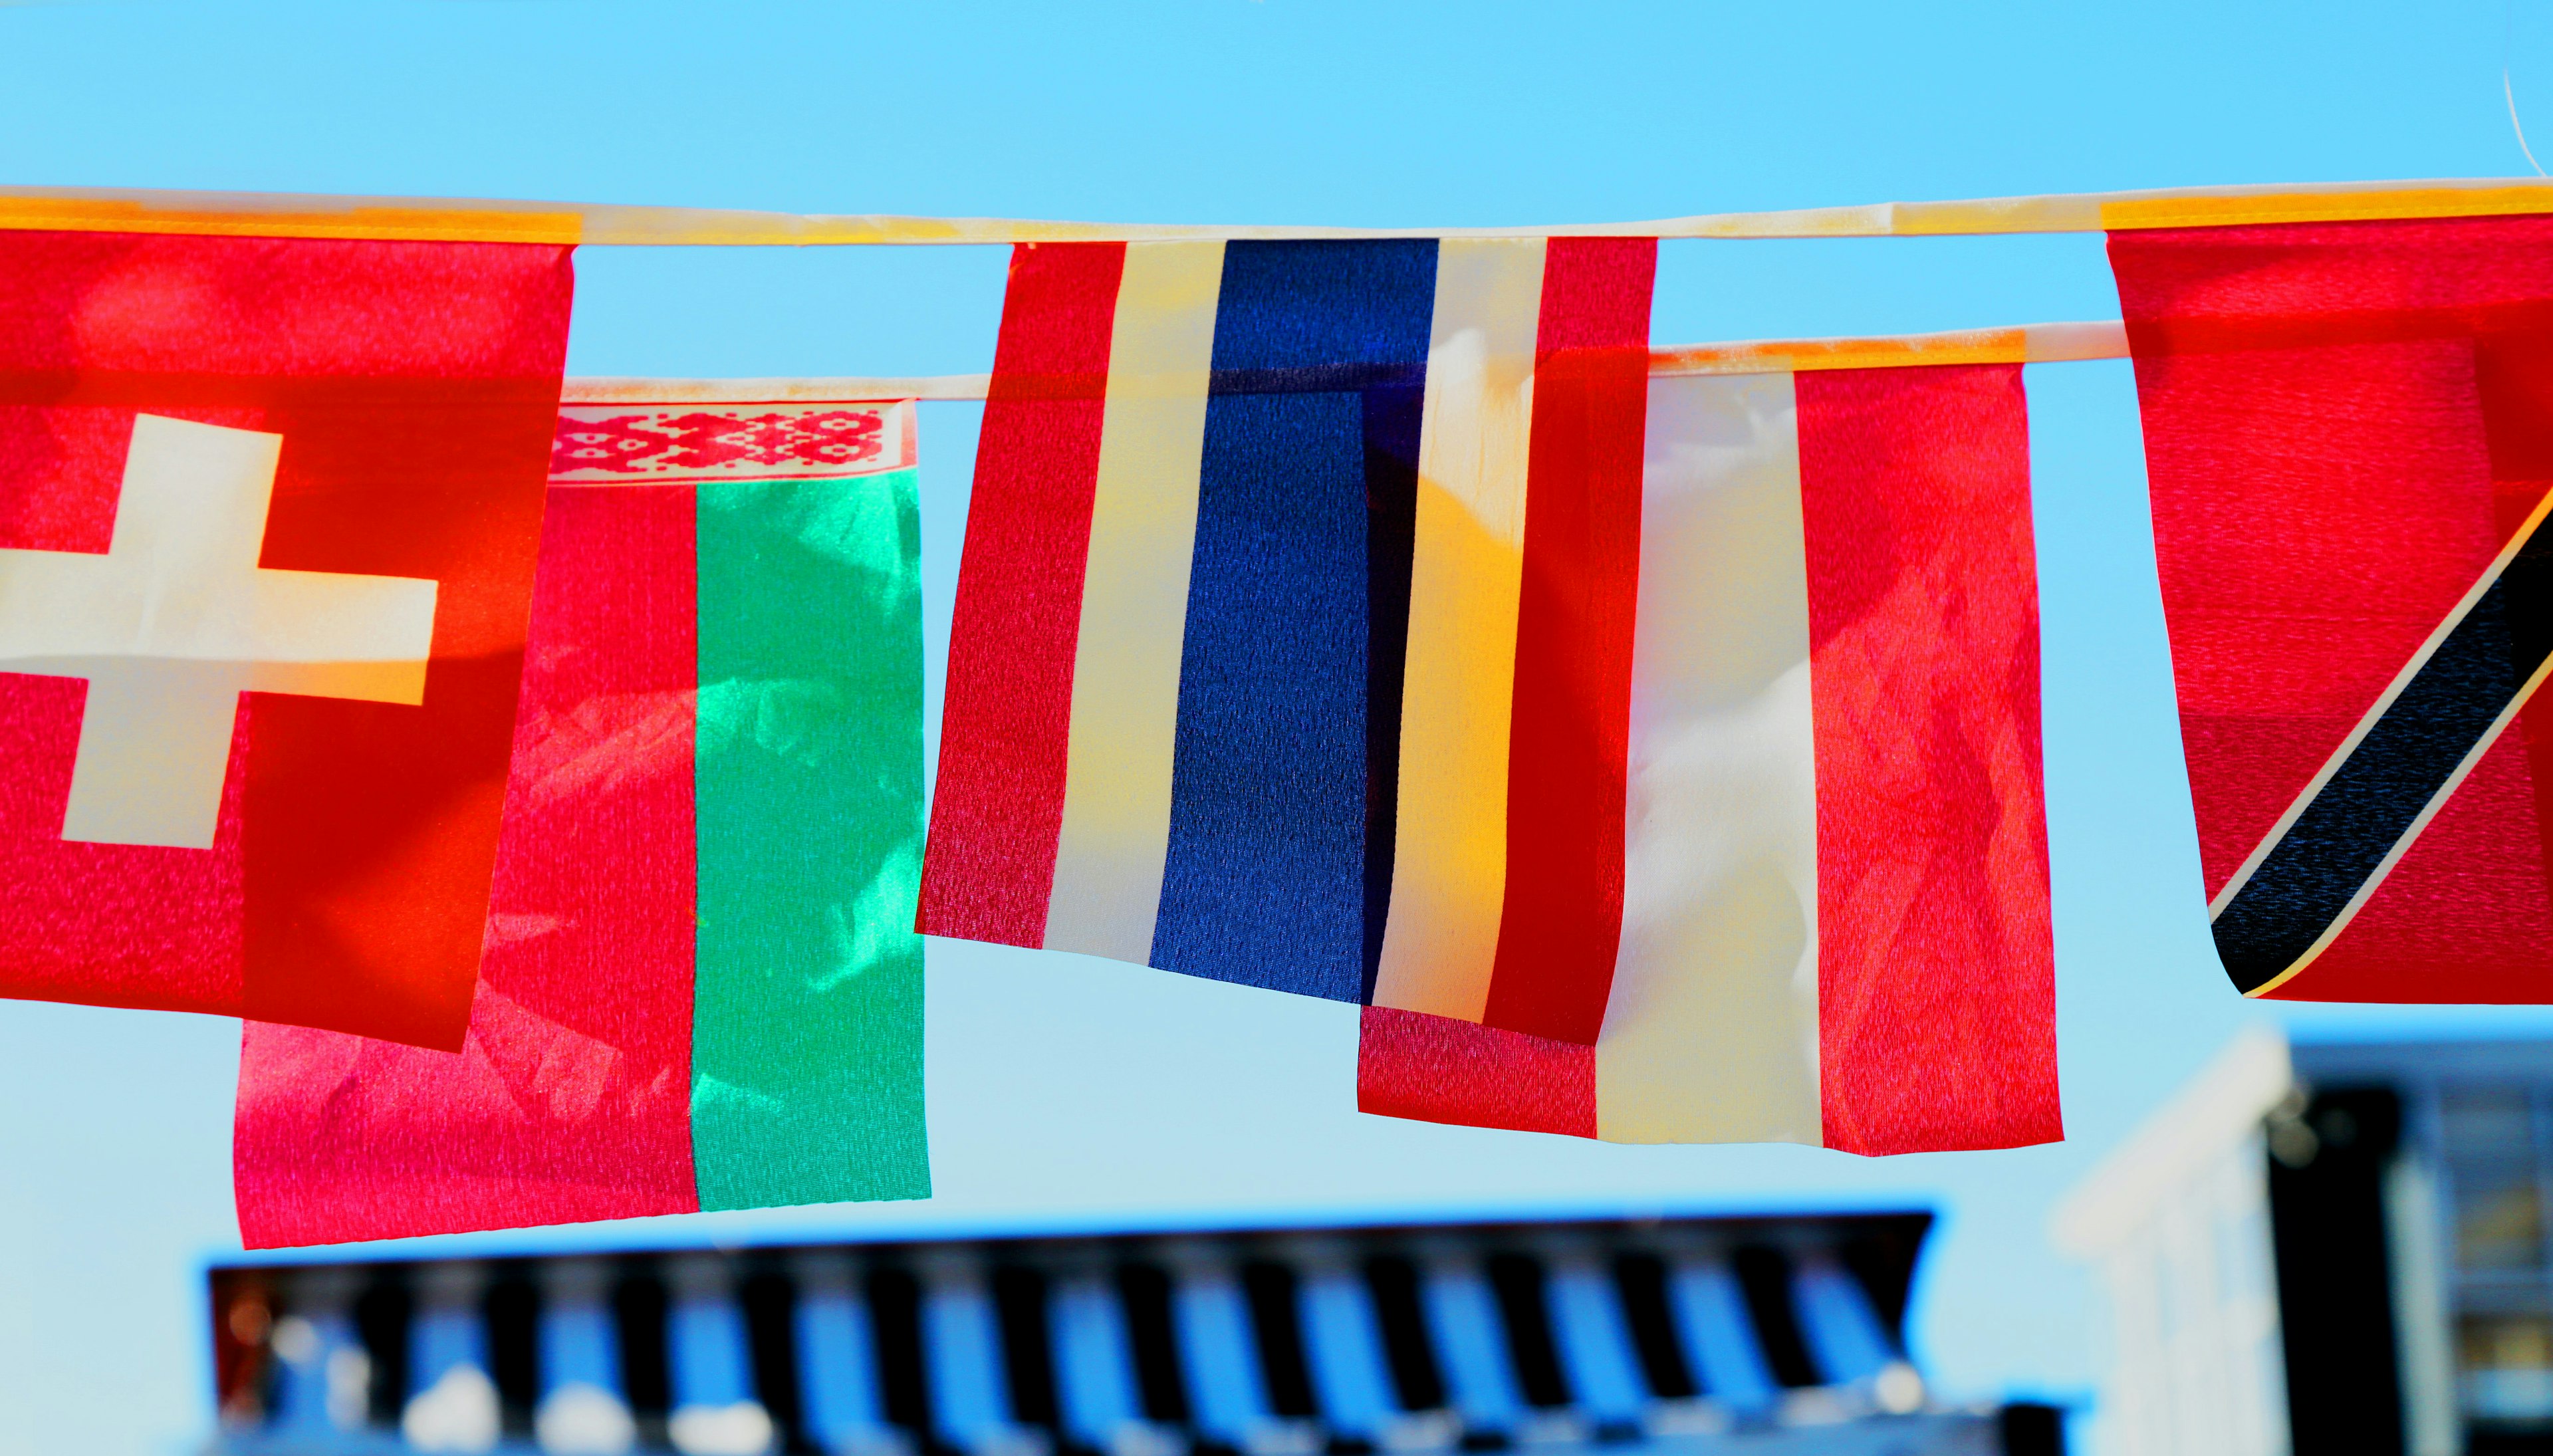 six different countries' flags hanging against a blue sky